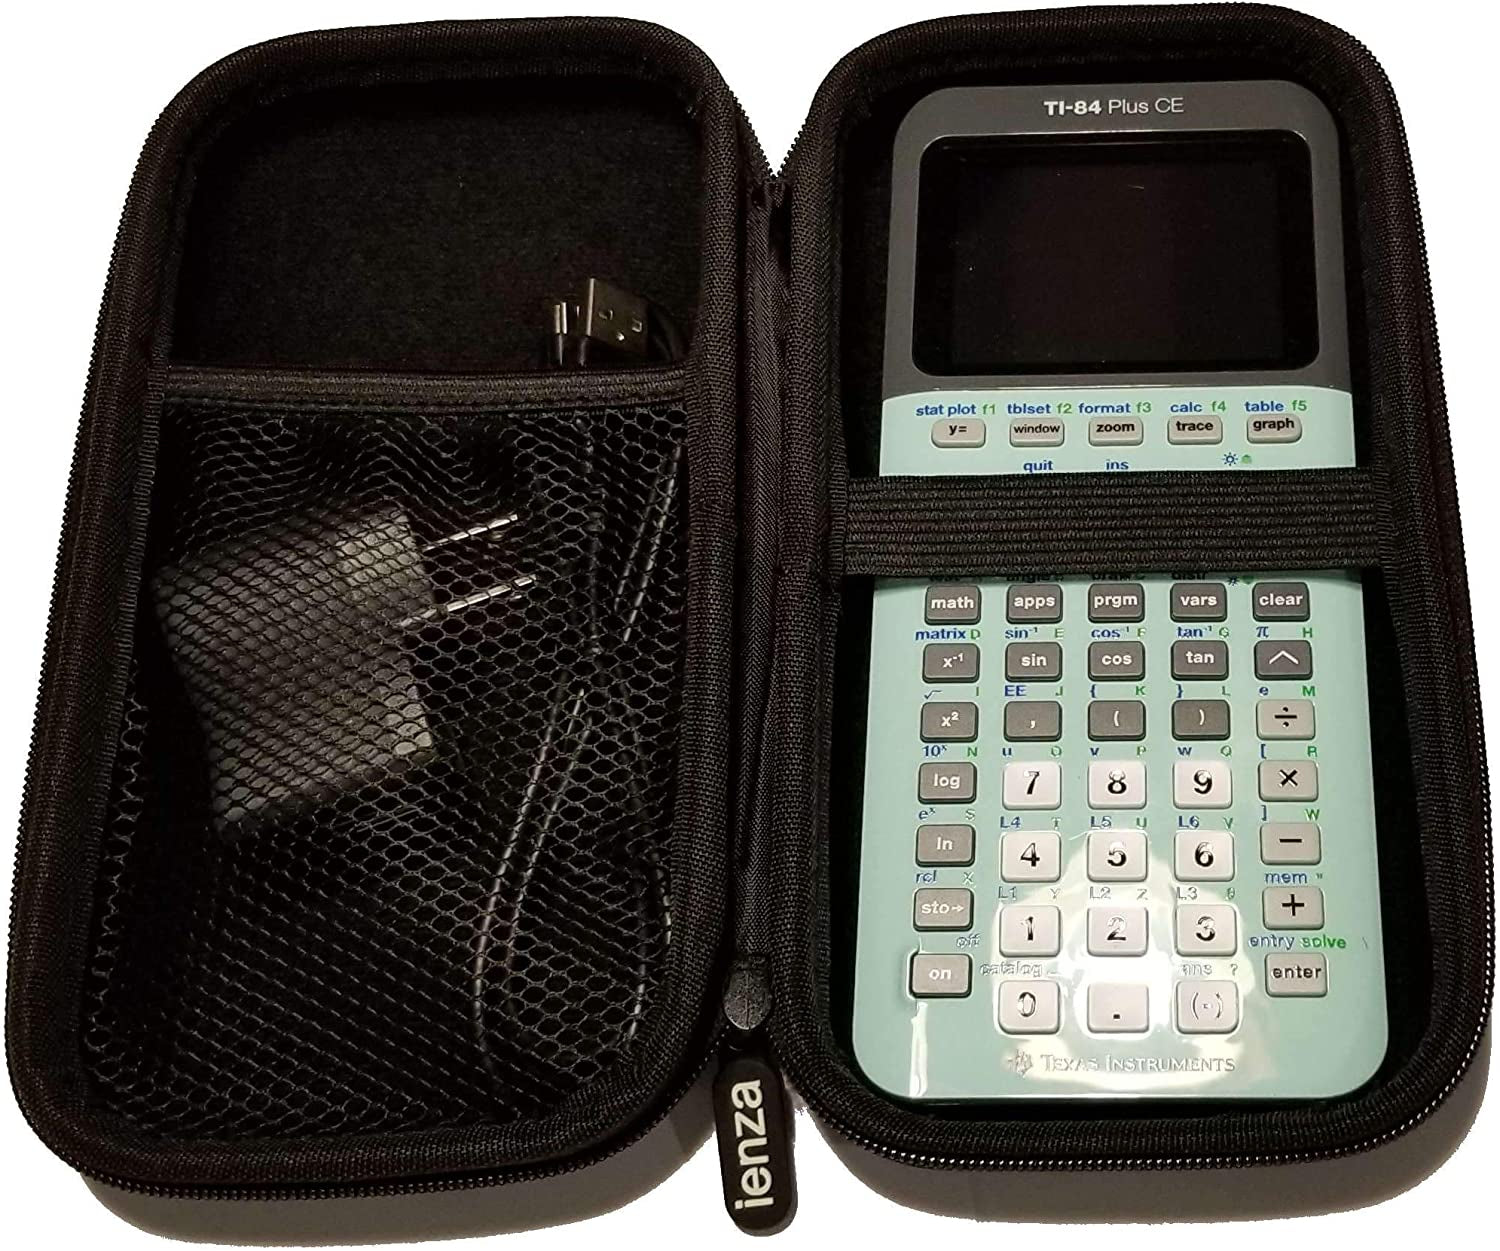 Hard Travel Case/Protecting/Carrying Case for Texas Instruments TI-84 plus CE, TI-83 plus CE, TI-84 plus CE Color Graphing Calculator with Extra Mesh Pocket for Accessories